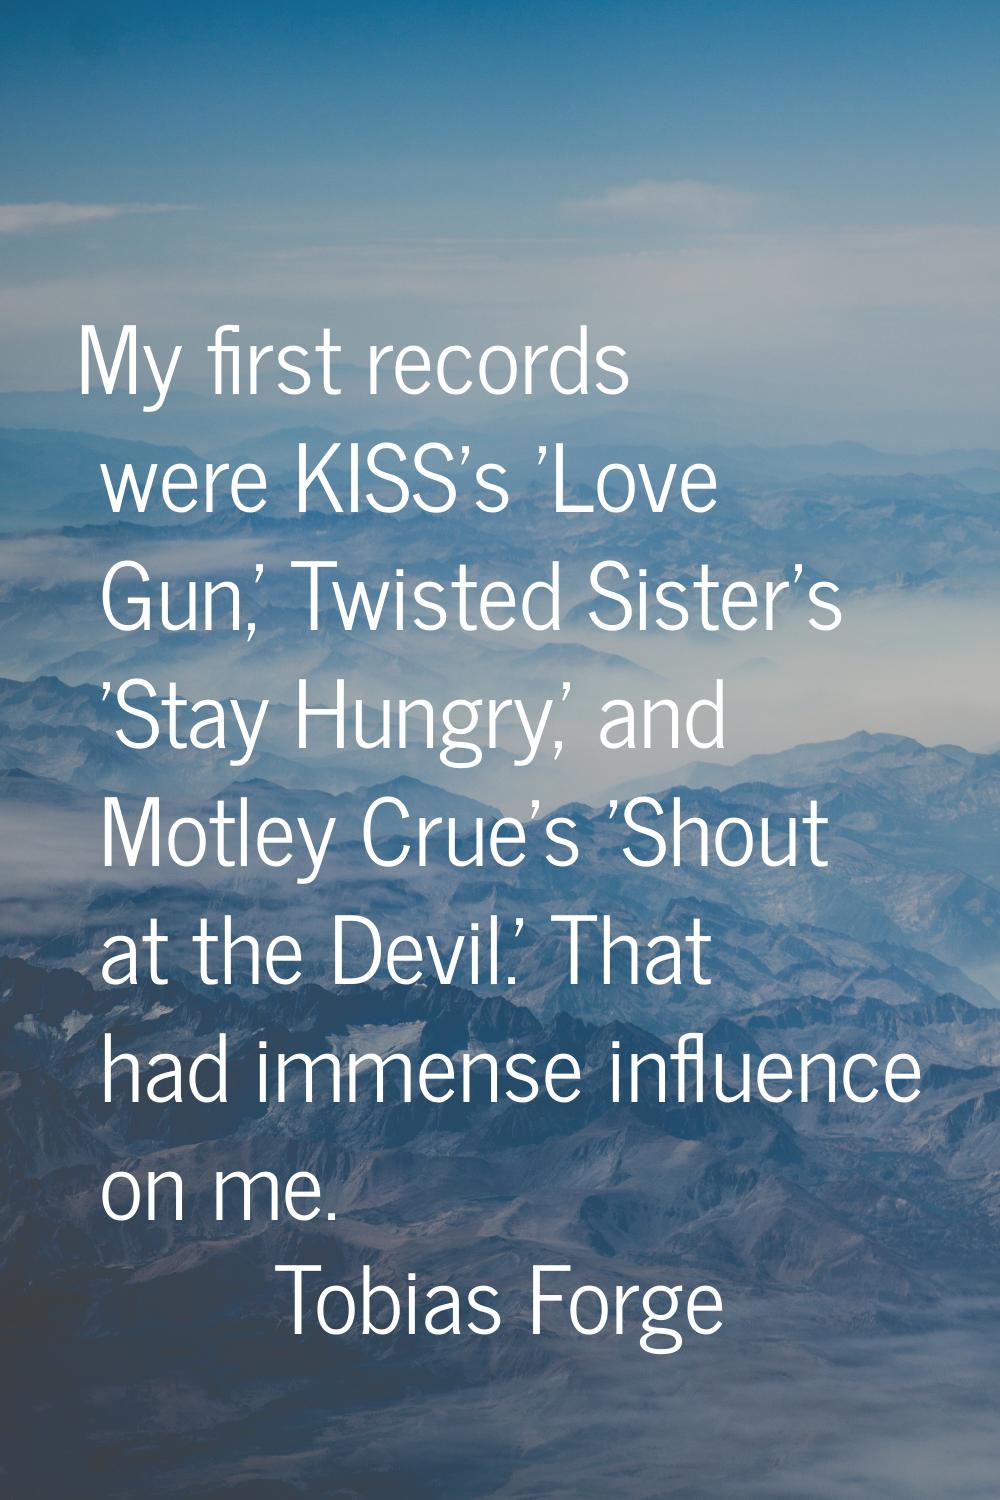 My first records were KISS's 'Love Gun,' Twisted Sister's 'Stay Hungry,' and Motley Crue's 'Shout a